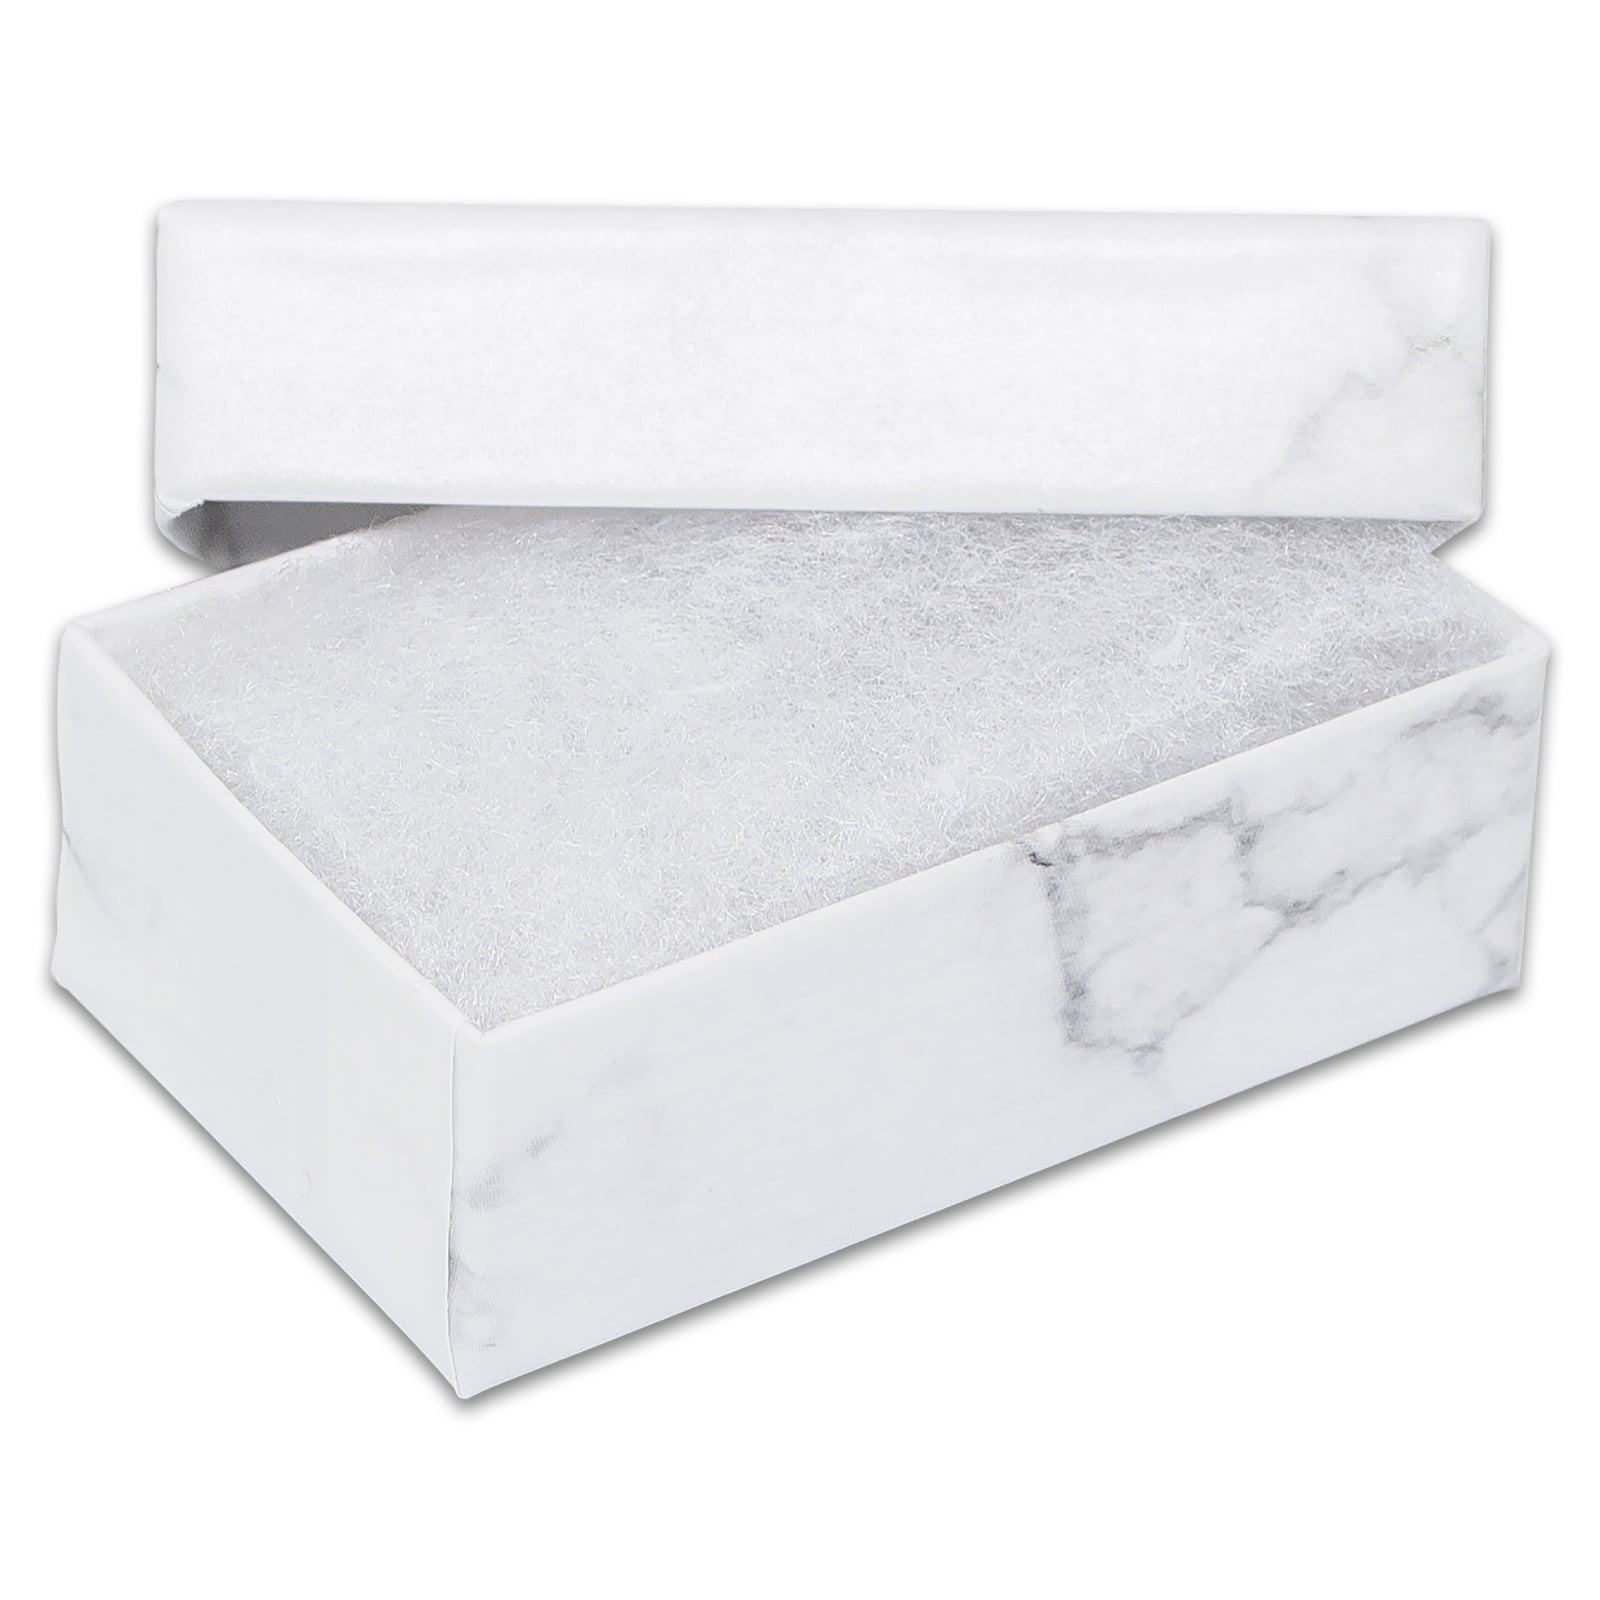 25 Cotton Filled Silver Foil Jewelry Display Gift Boxes 2 5/8" X 1 1/2" X 1" 